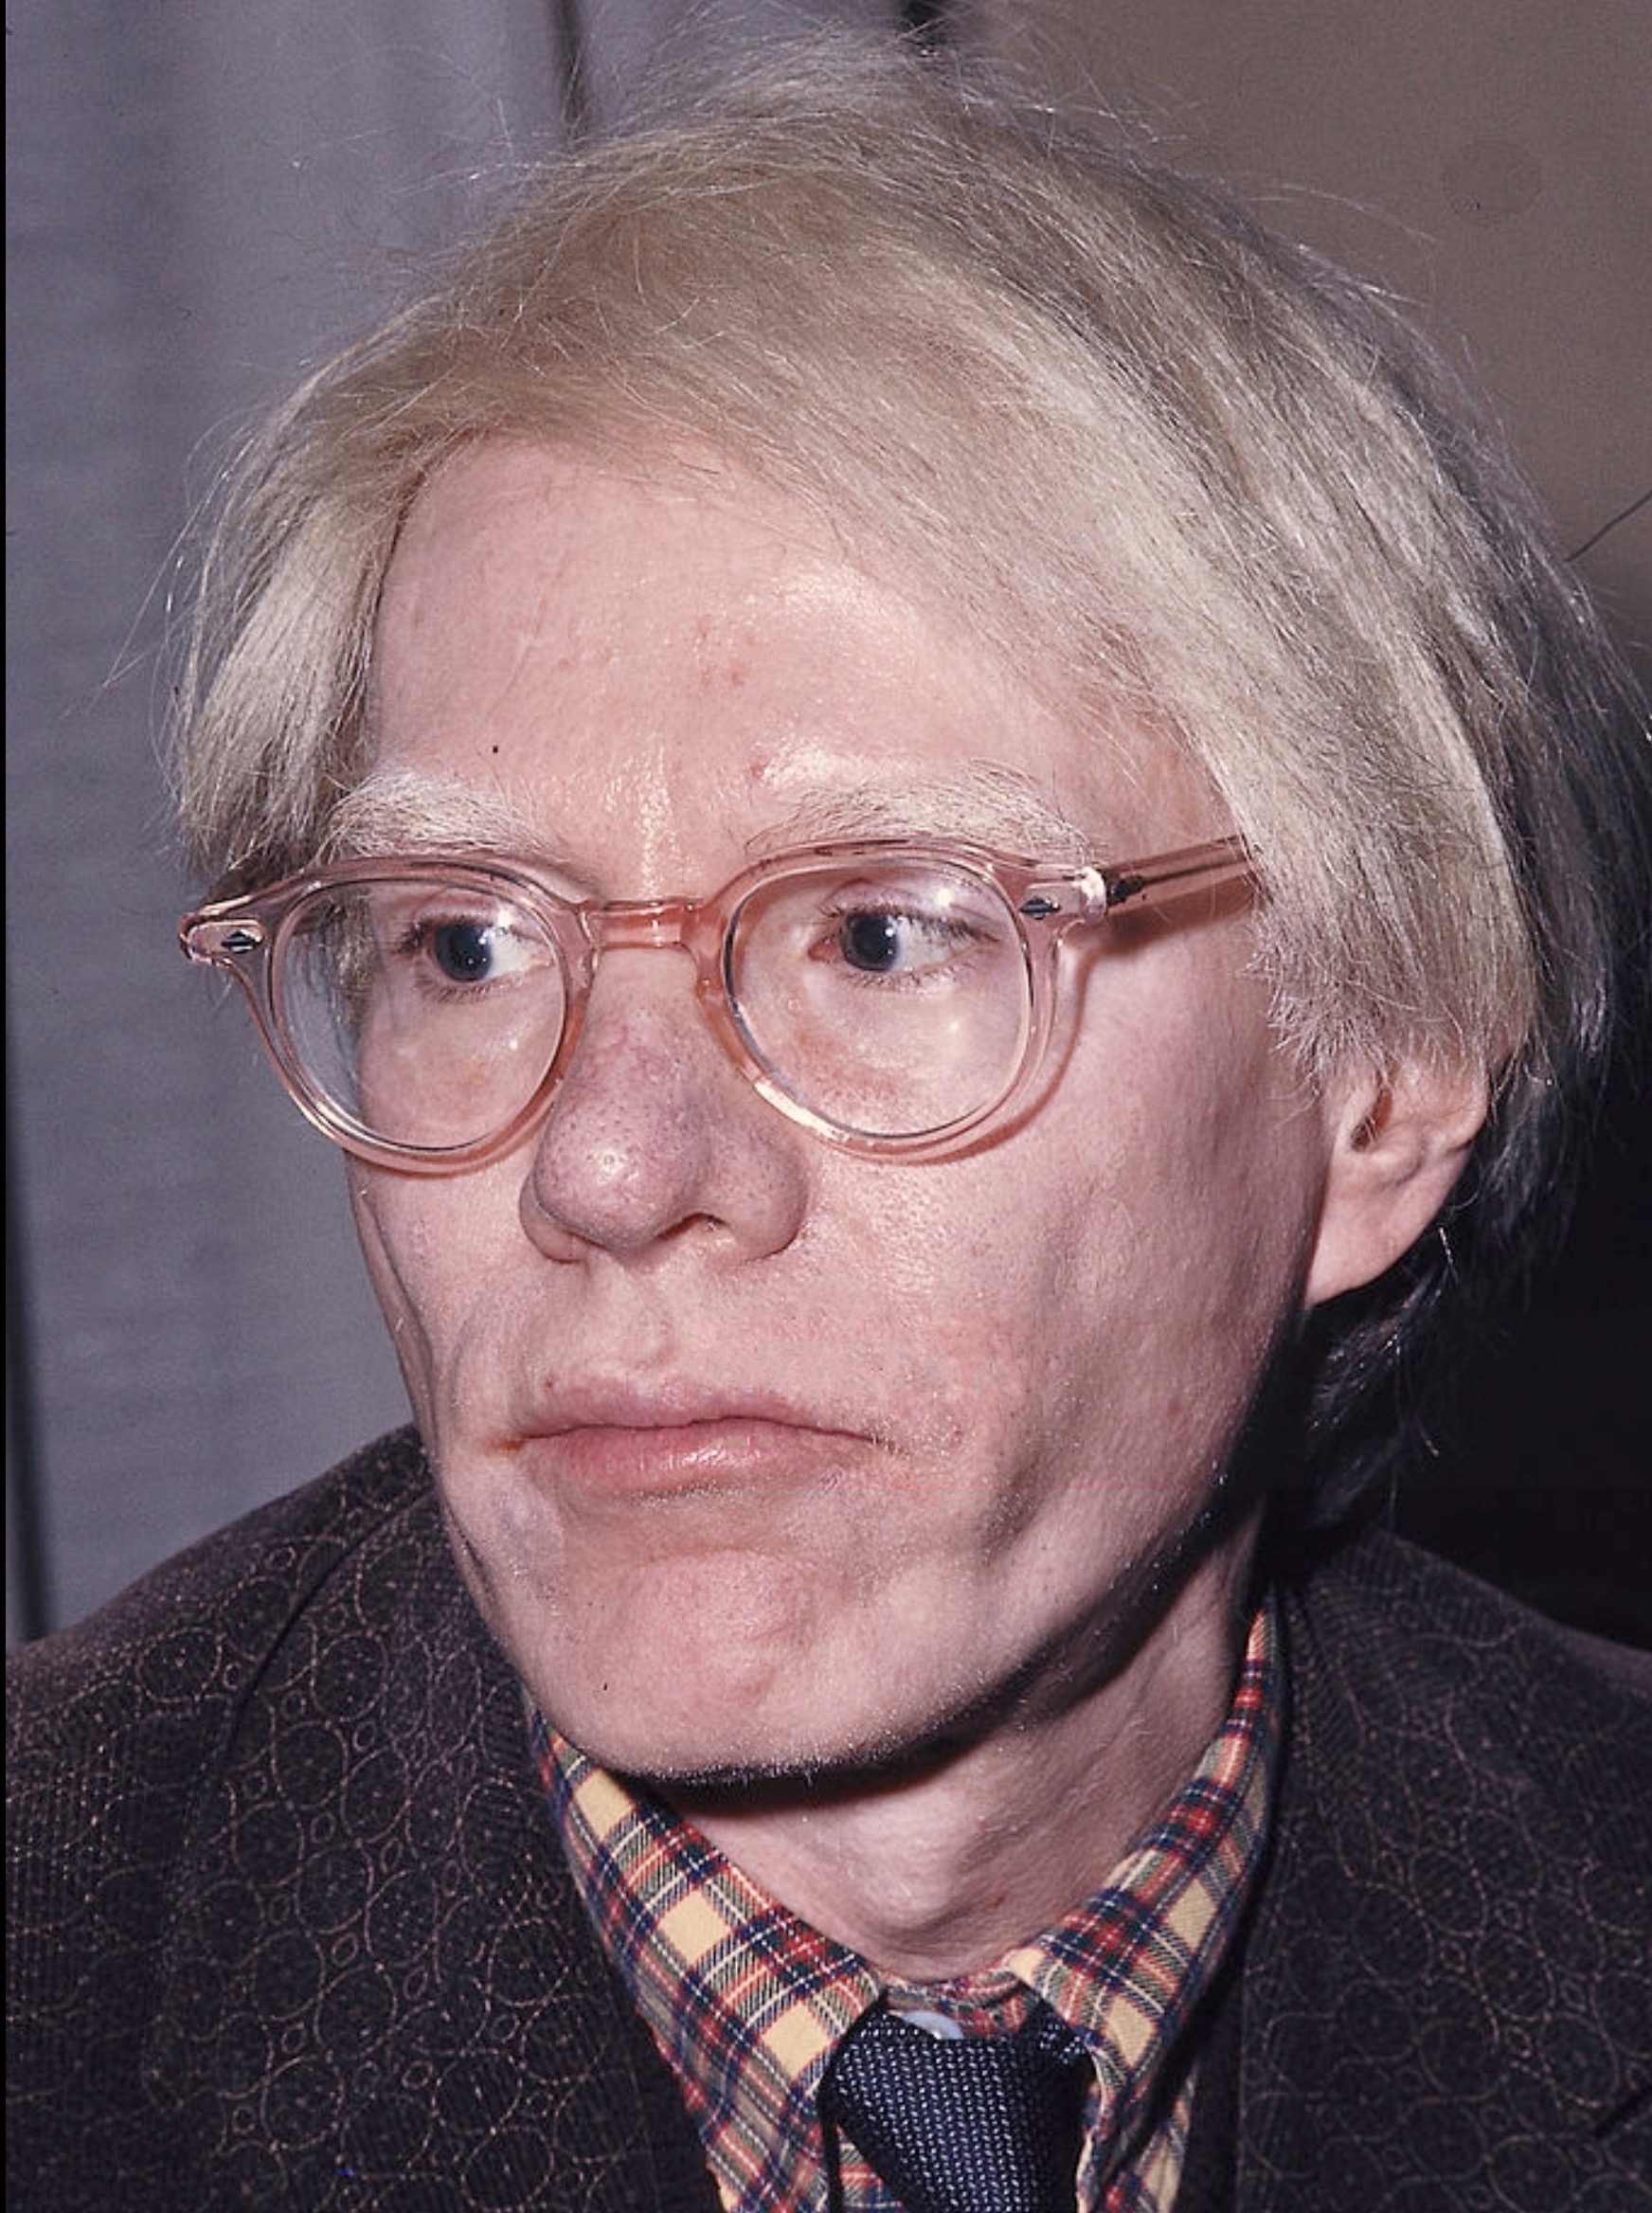 Portrait of Andy Warhol at his exhibition dedicated to Black transvestites in the US. Ferrara, November 1975 - photo courtesy Wikimedia Commons